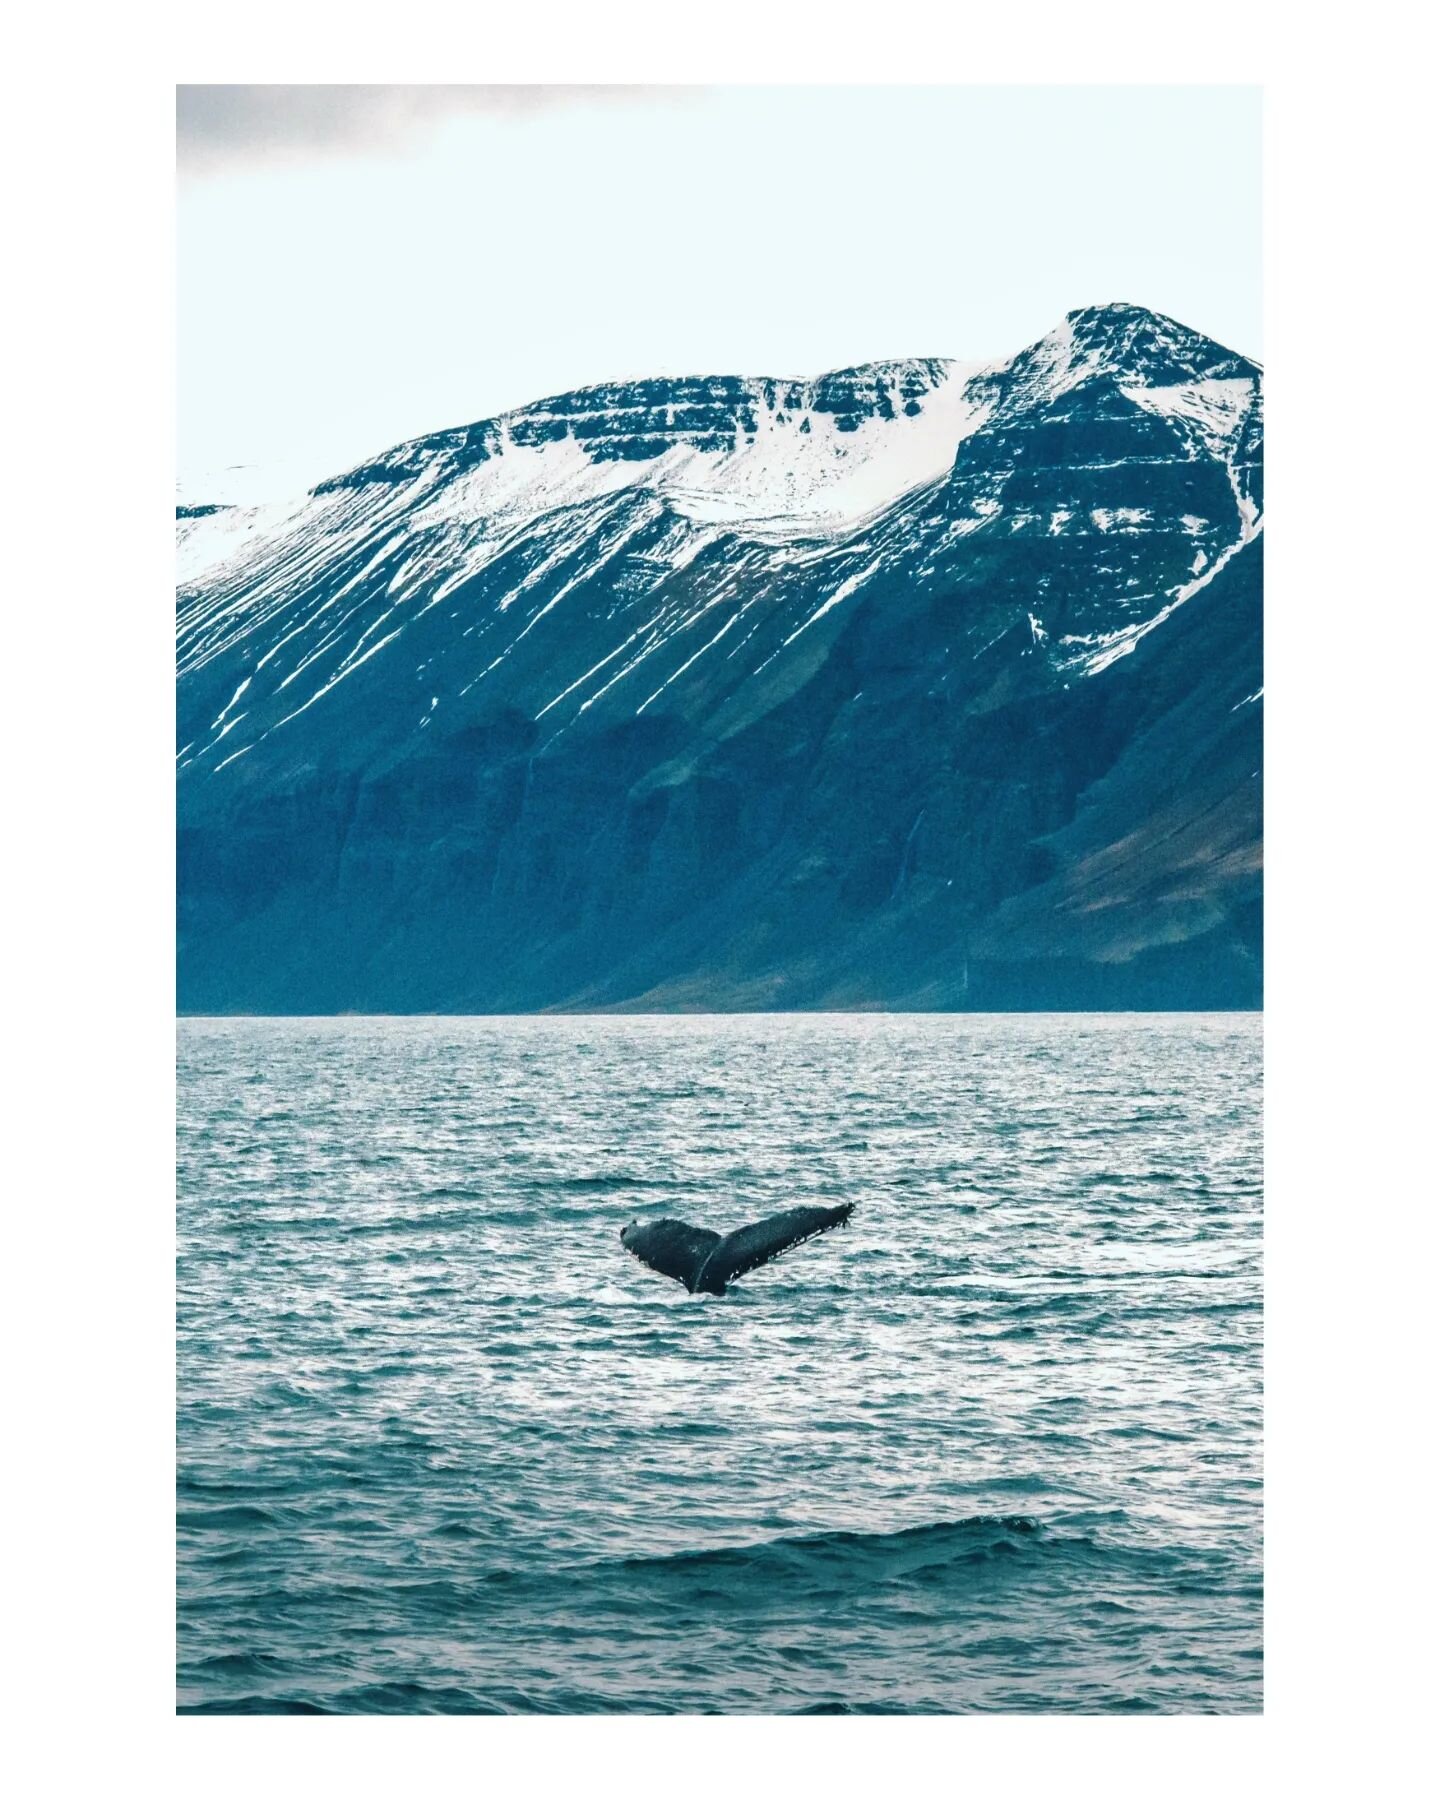 Chasing Humpbacks in Northern Iceland.

Did you know Humpback whale tail fins (aka flukes) are as distinct as fingerprints? 

(Check out image 2 &amp; 3)

These individual markings allow researchers to track and identify different whales around the w